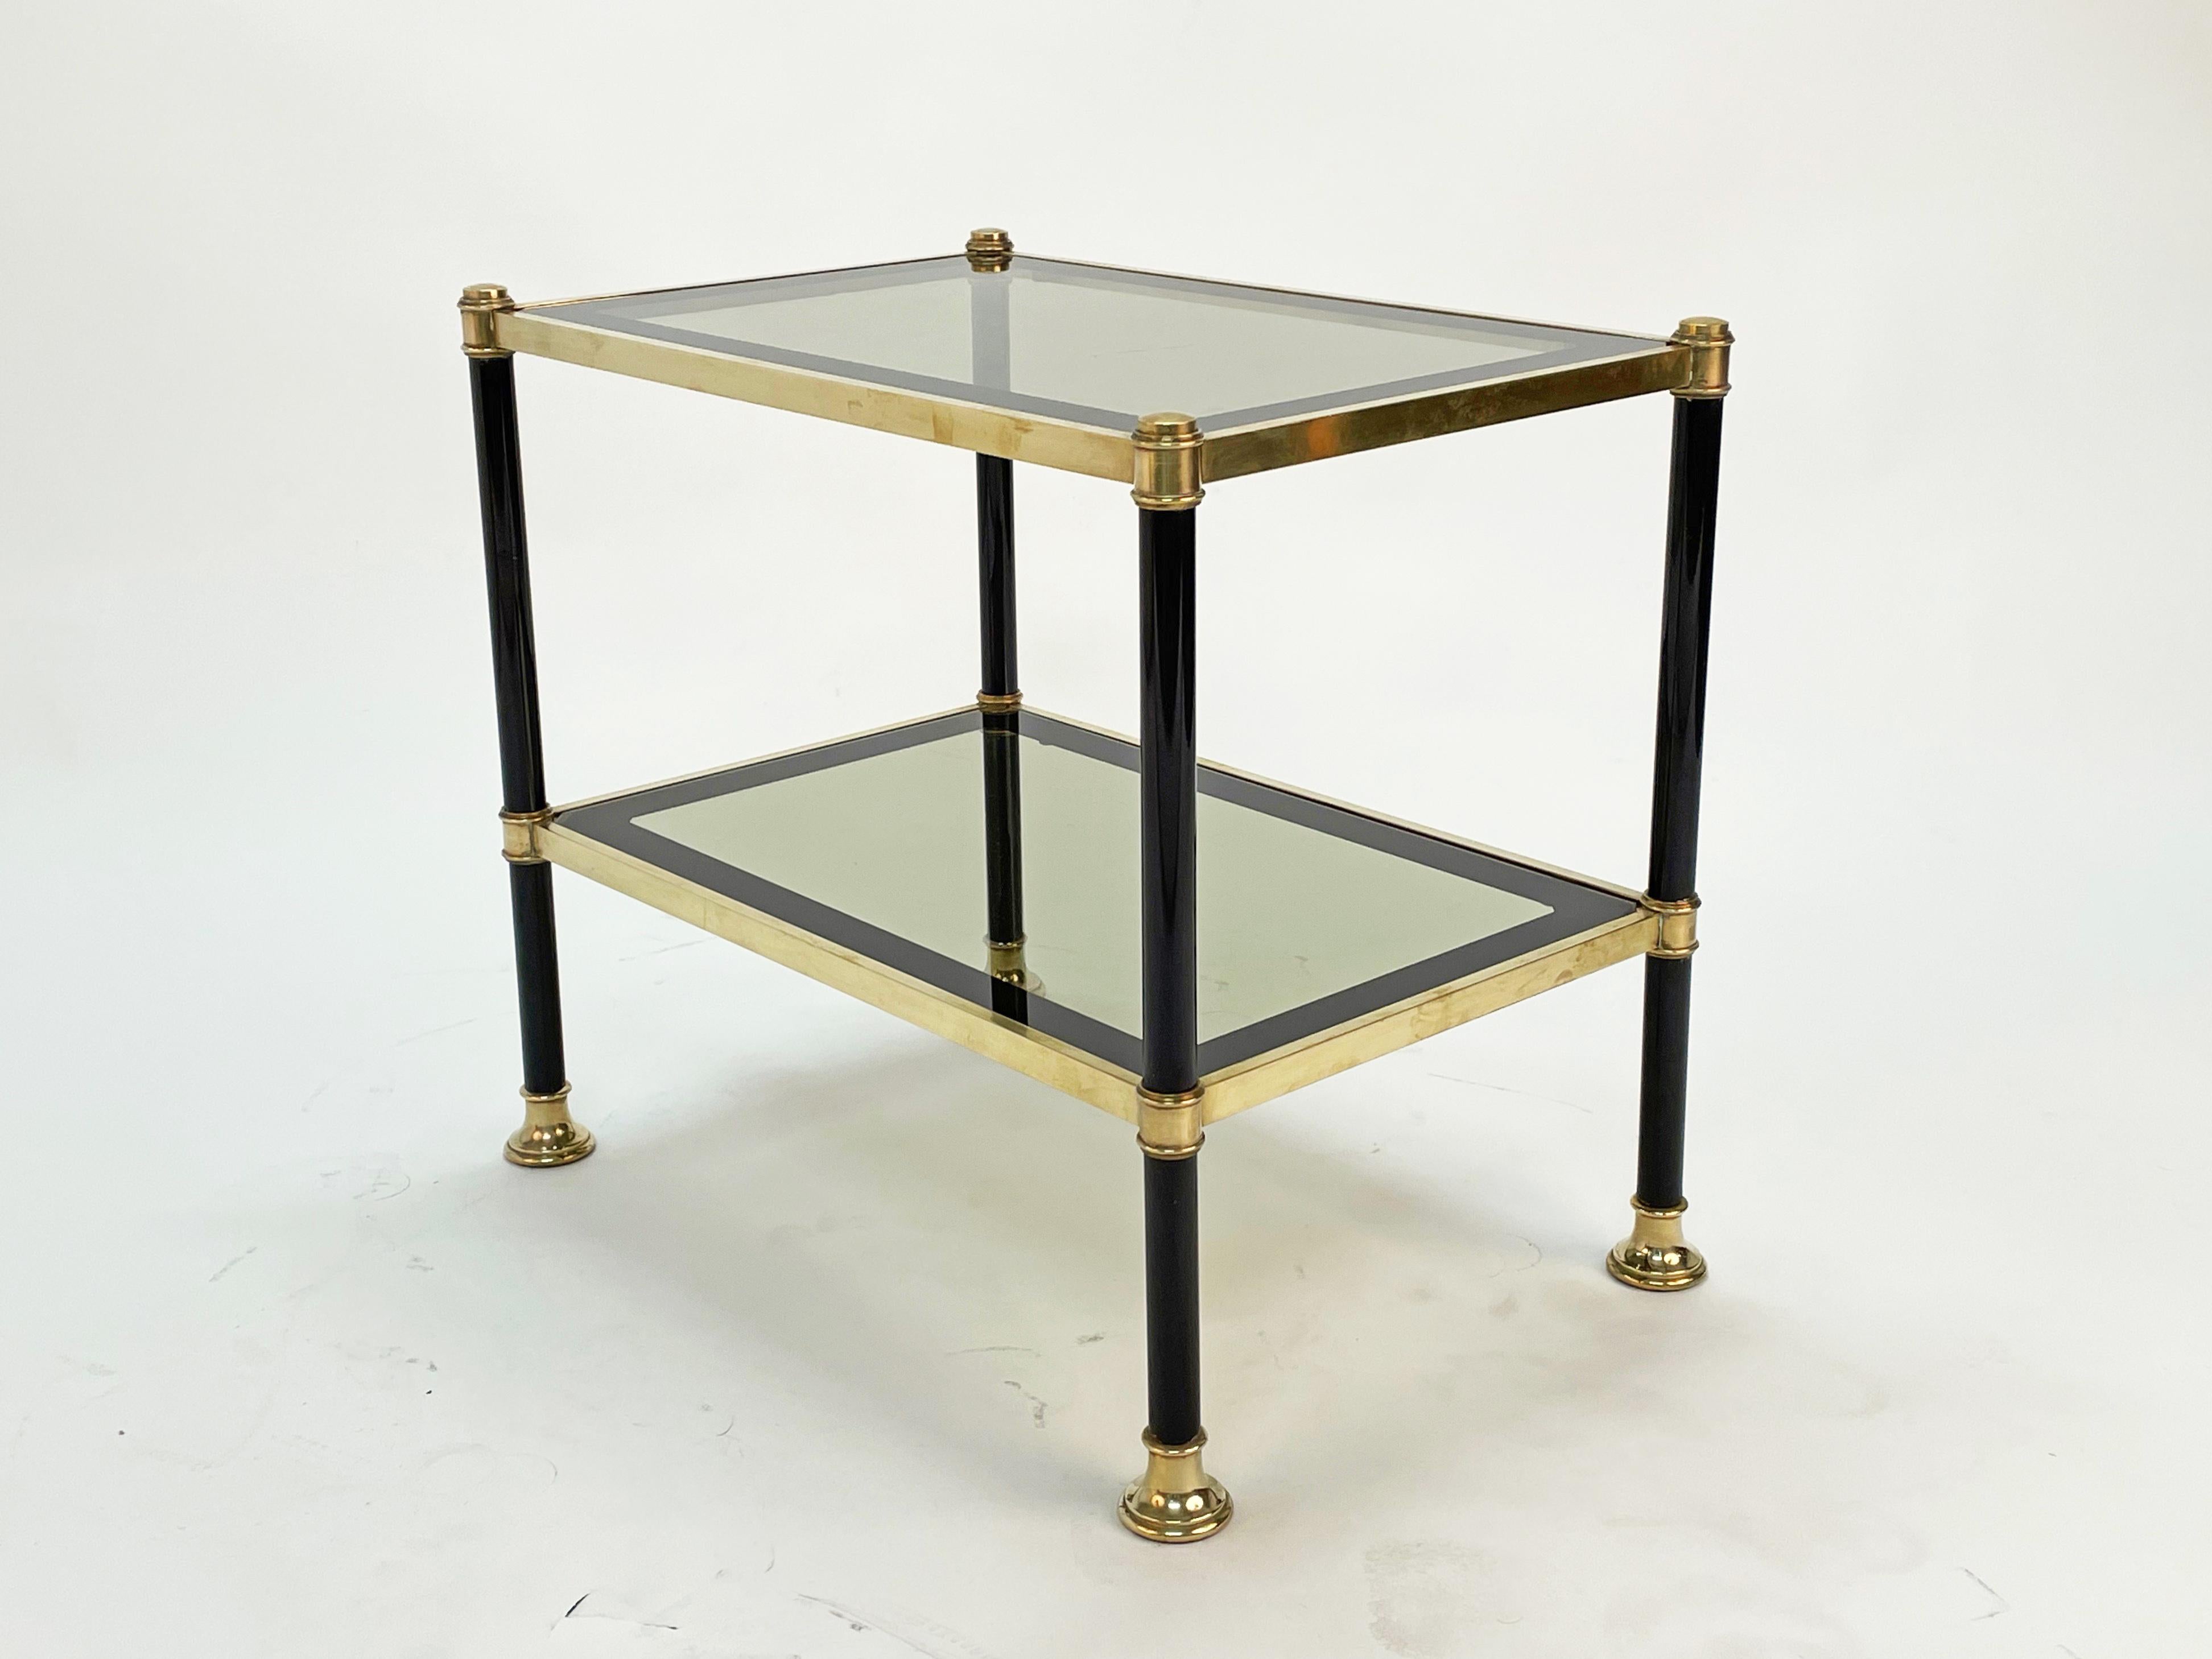 Midcentury Brass and Black Metal Rectangular Coffee Table with Smoked Glass 1970 For Sale 4